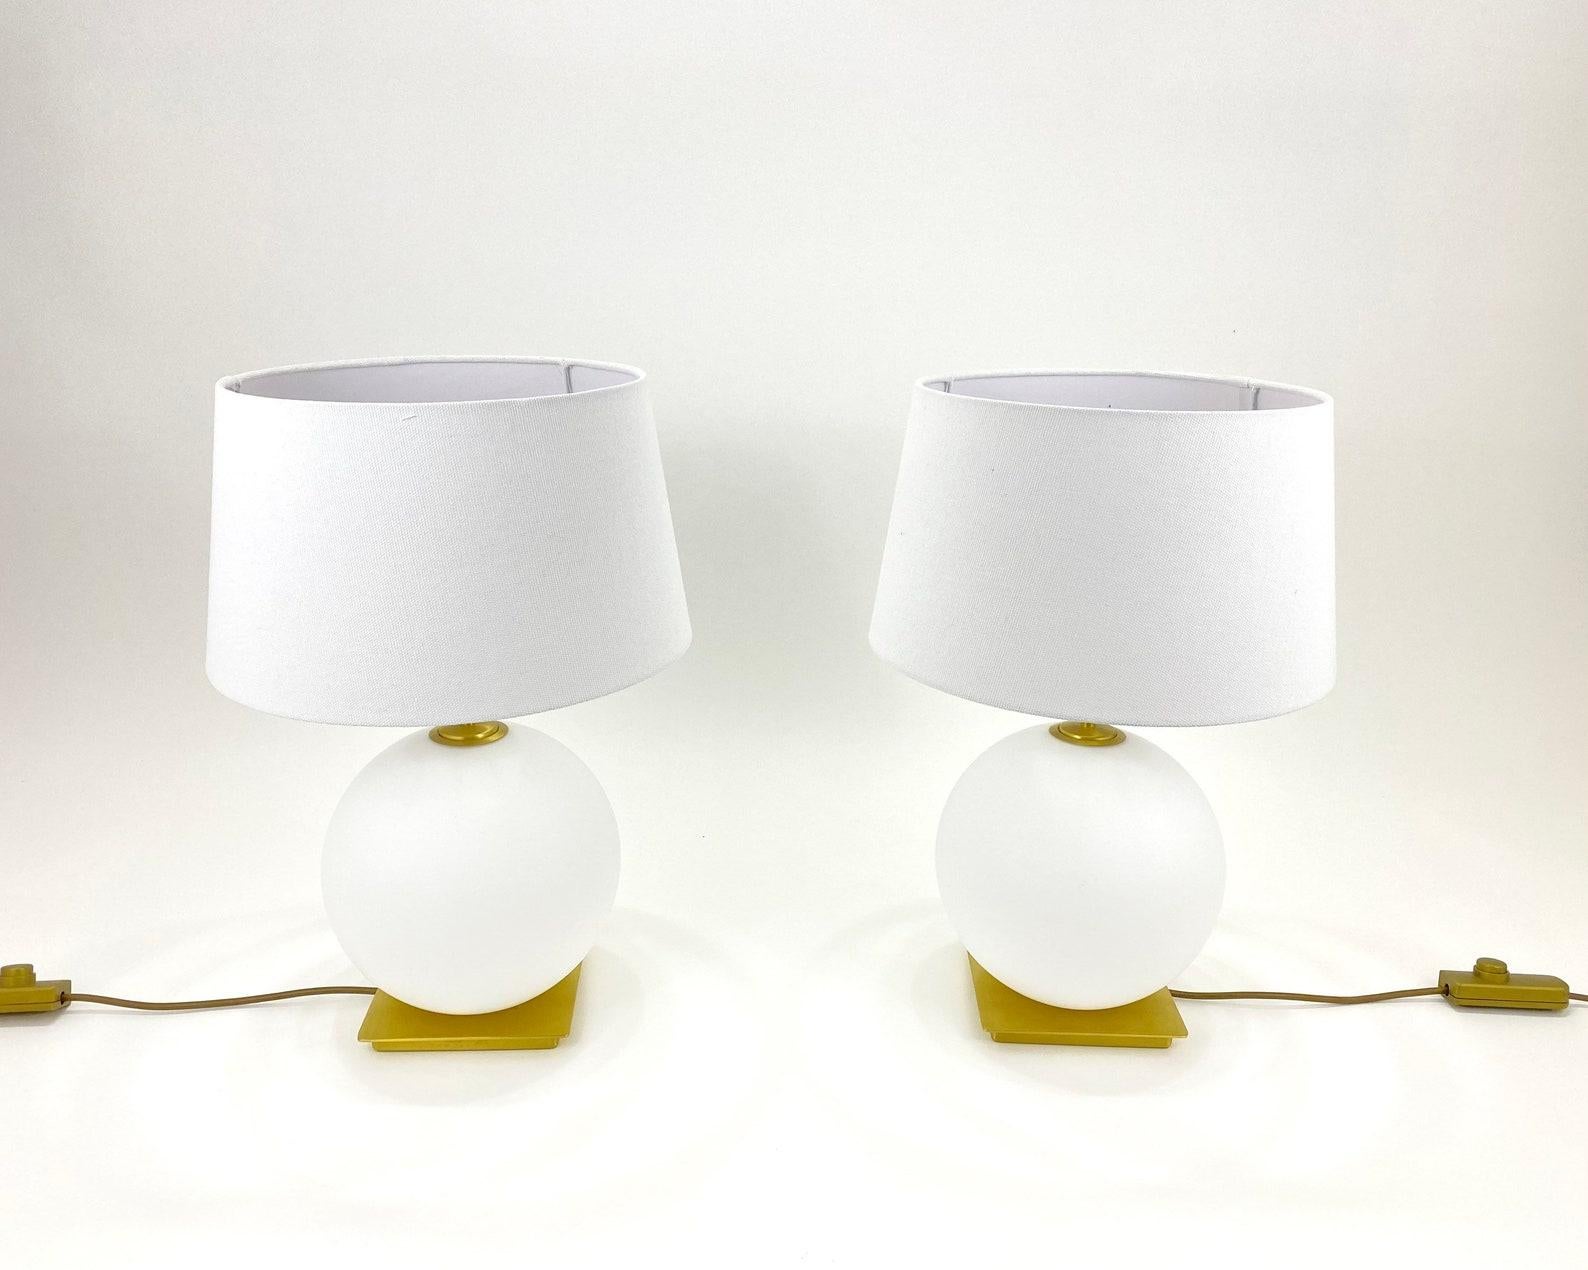 A pair of hiqh-quality designer table lamps from the famous company Holtkötter, Germany.

Holtkoetter has been engineering and manufacturing product in Germany for over 50 years and assembling product in the U.S. for about 30 years. 

Table